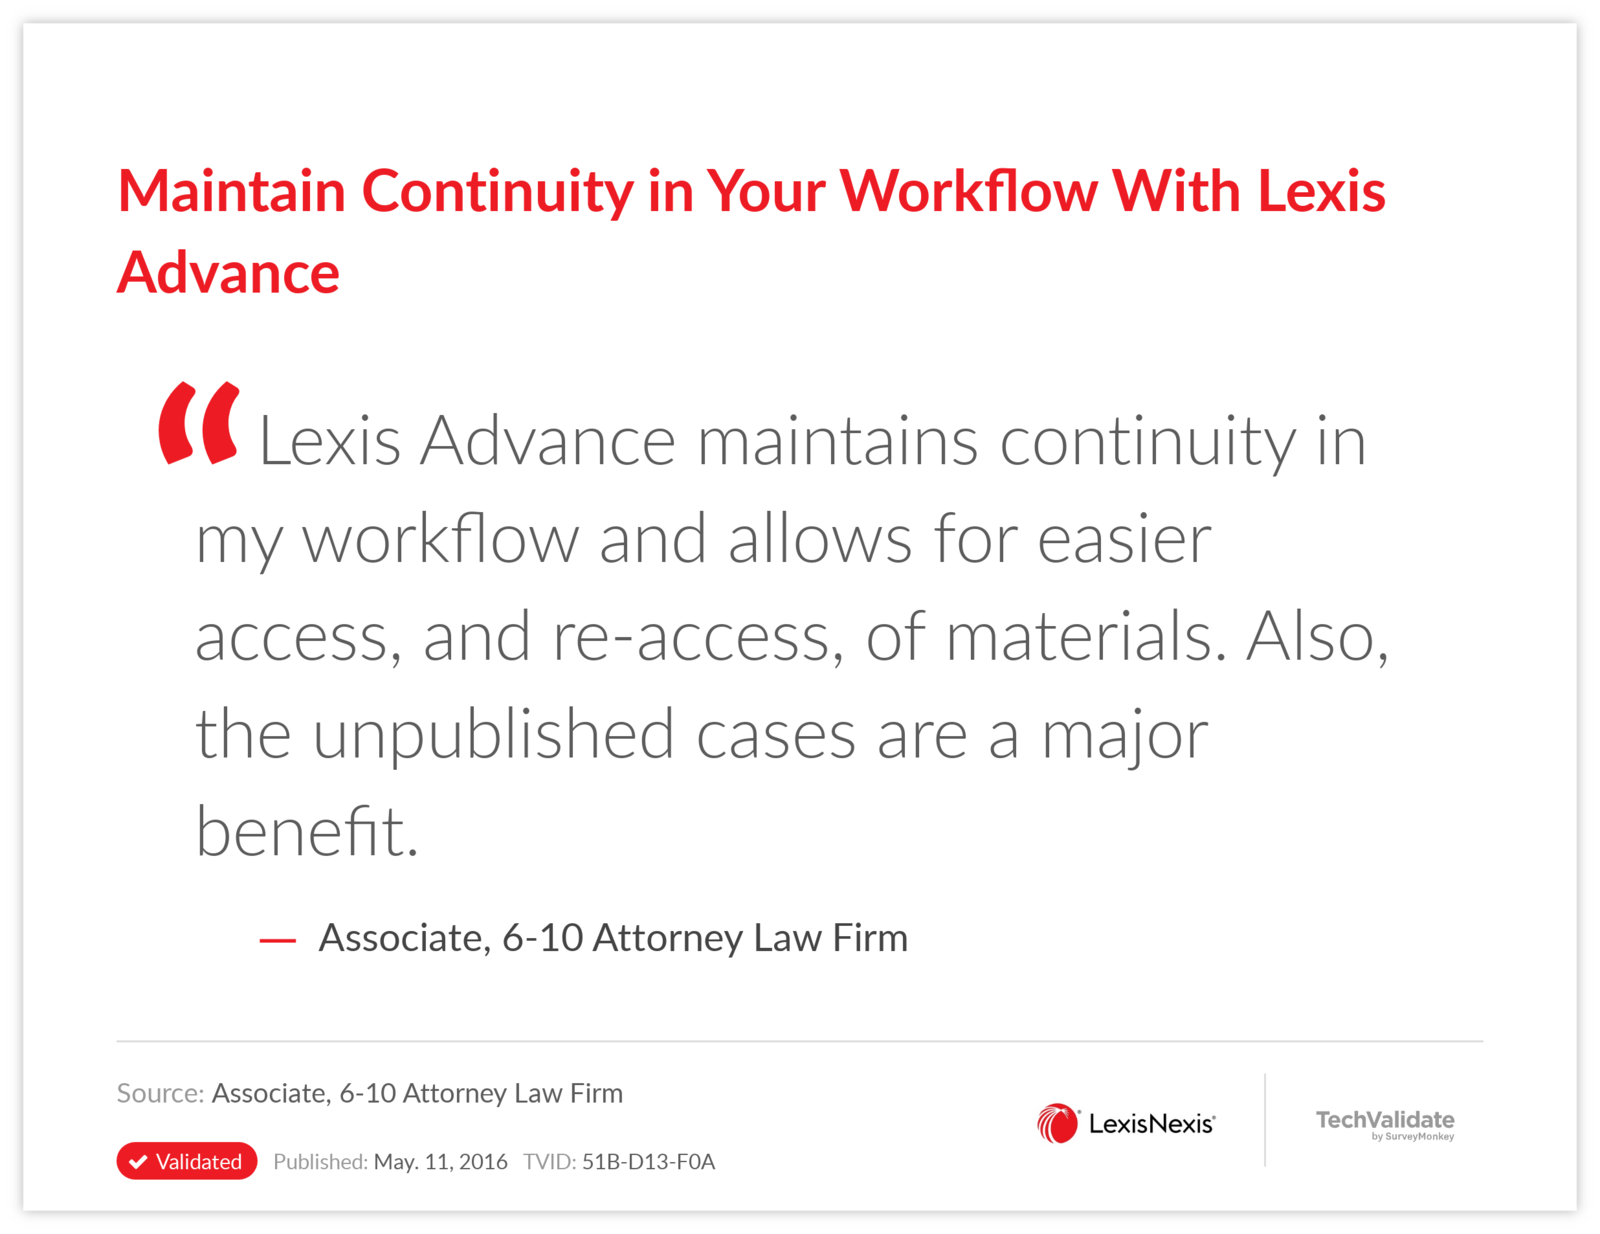 Maintain Continuity in Your Workflow With Lexis Advance